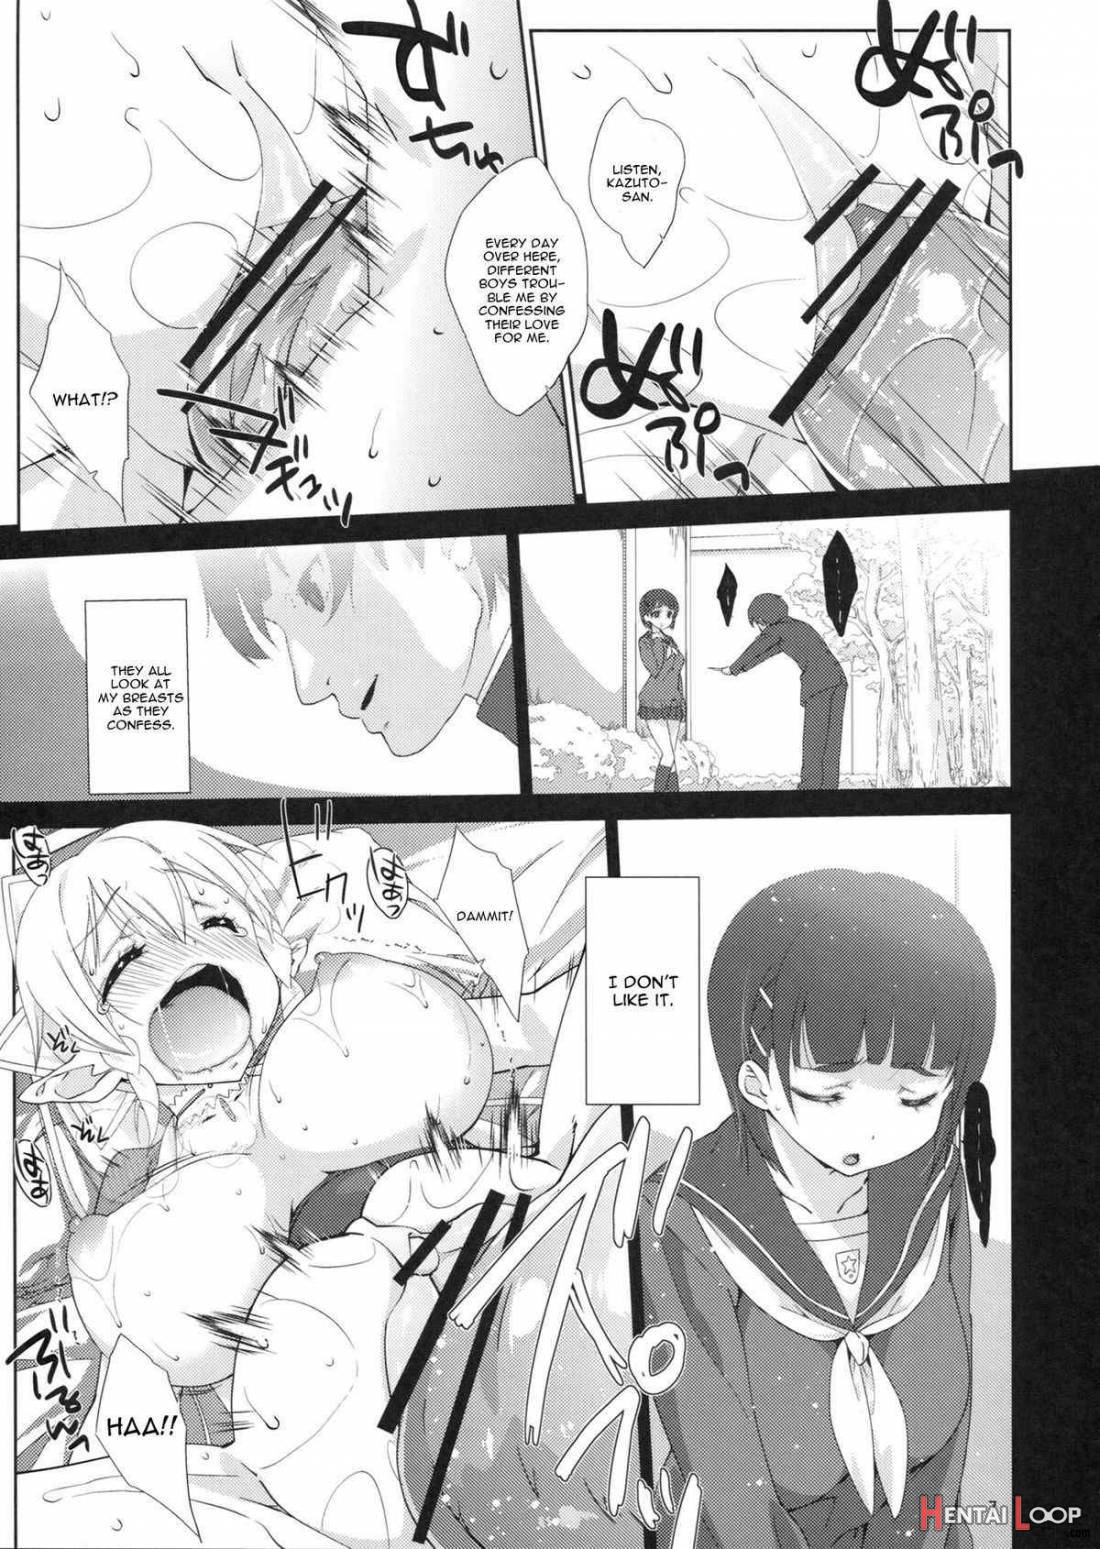 Suguha Route. page 4